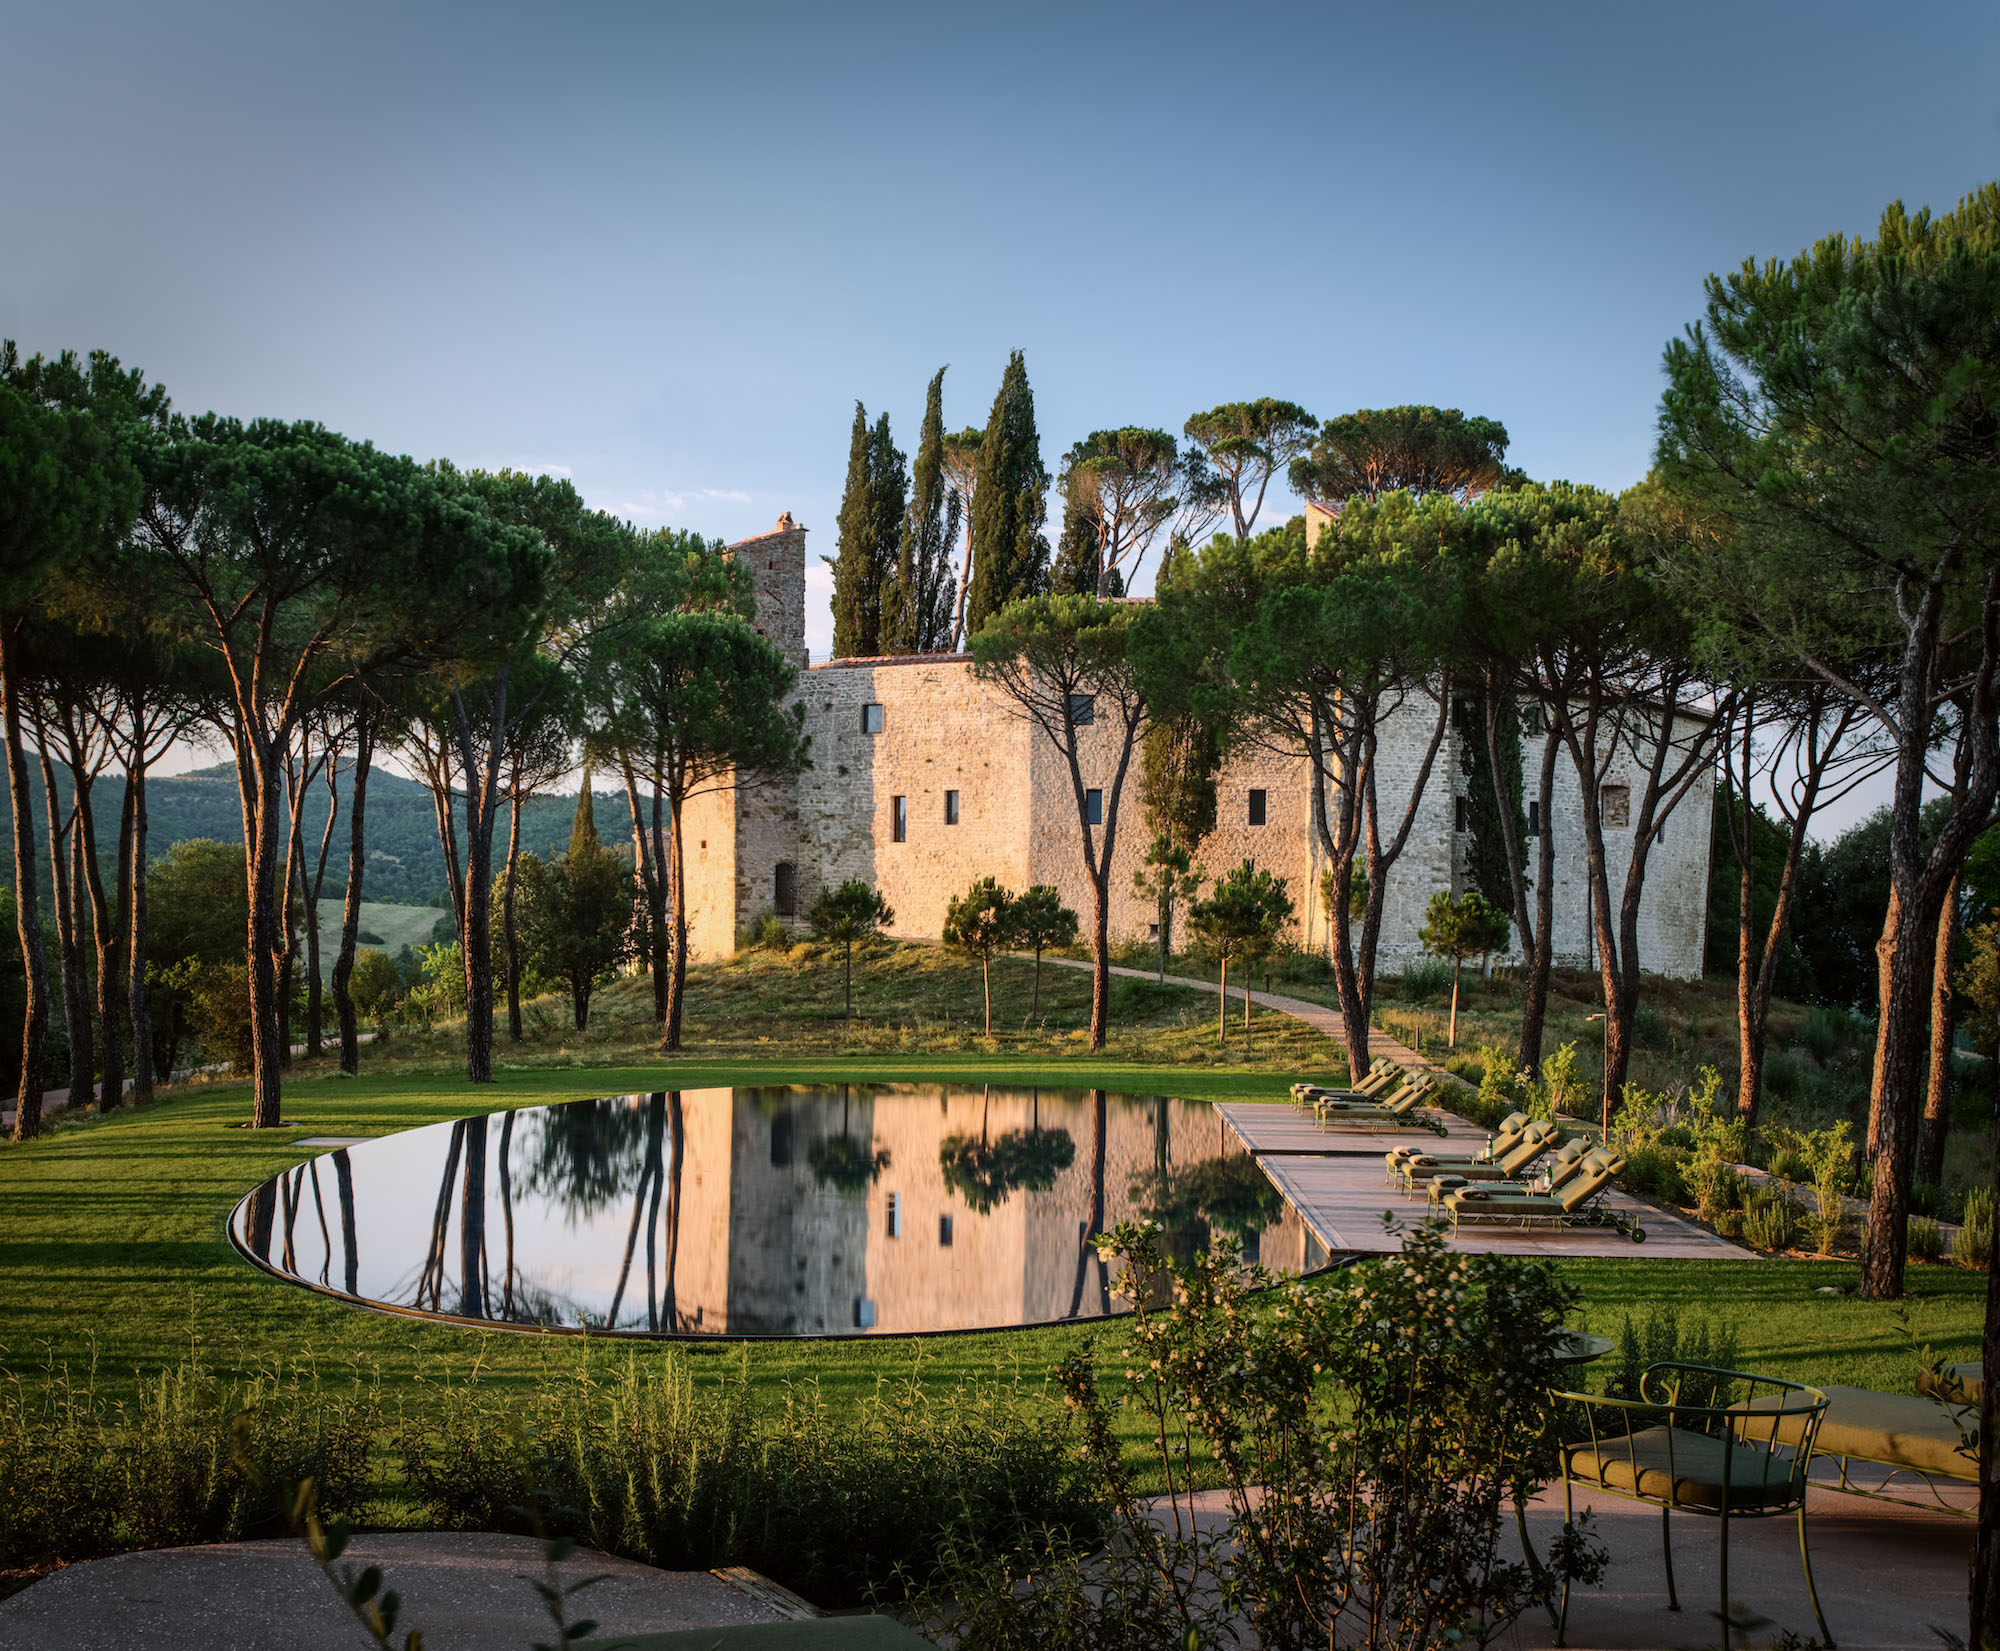 The 3,750-acre Castello di Reschio property includes a collection of private homes and the newly opened, 36-room boutique hotel housed within an 11th century castle. Just beyond the castle’s walls rests the oval-shaped swimming pool, designed to sit within the grass as if it were floating.